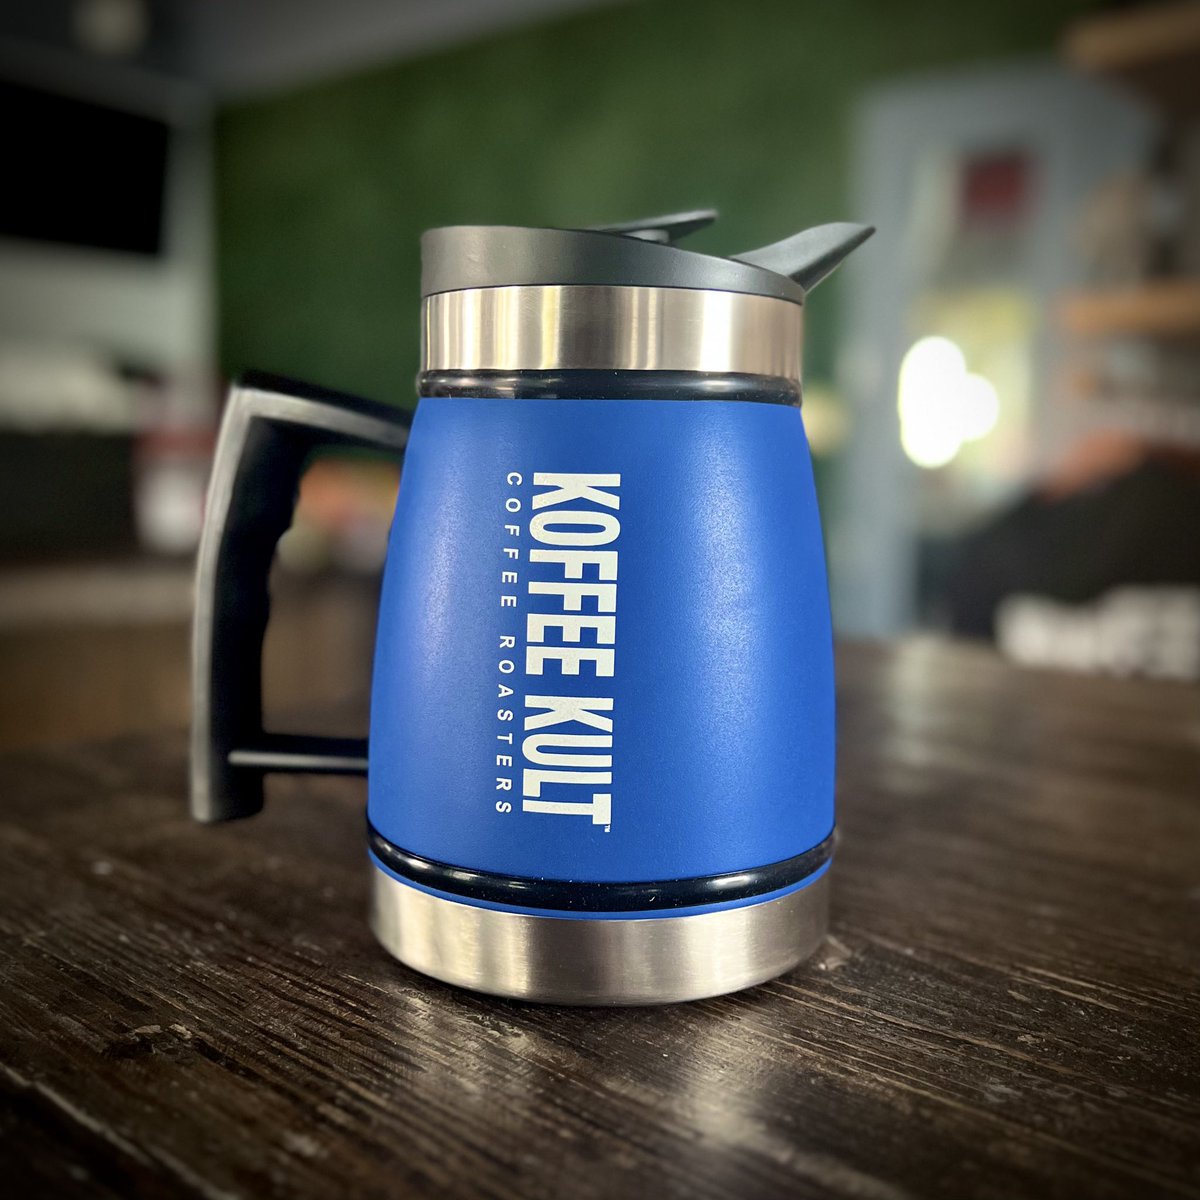 🚨GIVEAWAY🚨 We're giving away a FREE 32oz Blue French Press! Must follow us to be eligible. Like and RT to enter.